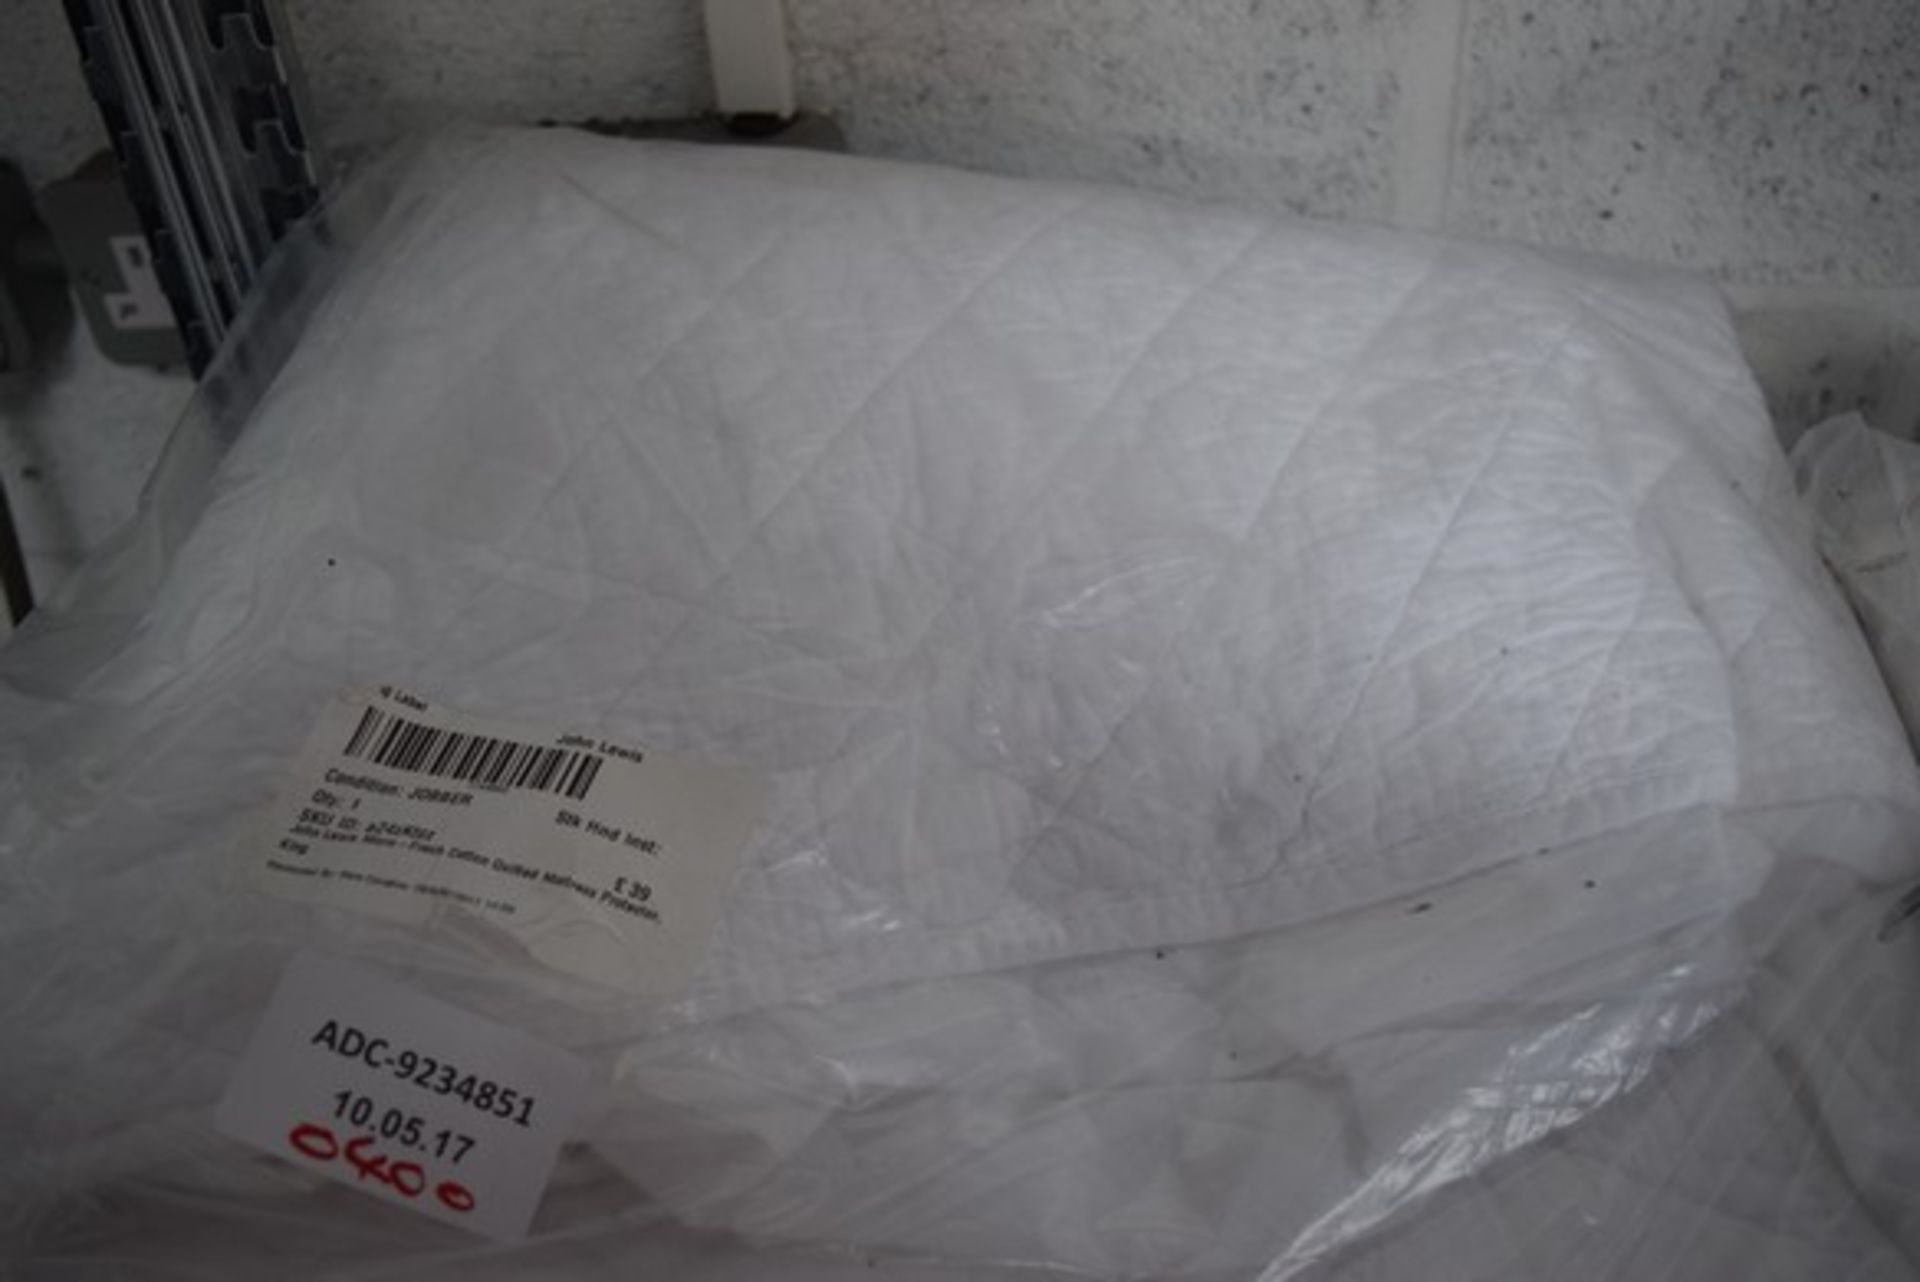 1 x DESIGNER FRESH COTTON QUILTED MATTRESS PROTECTOR IN KING SIZE RRP £40 10.05.2017 *PLEASE NOTE